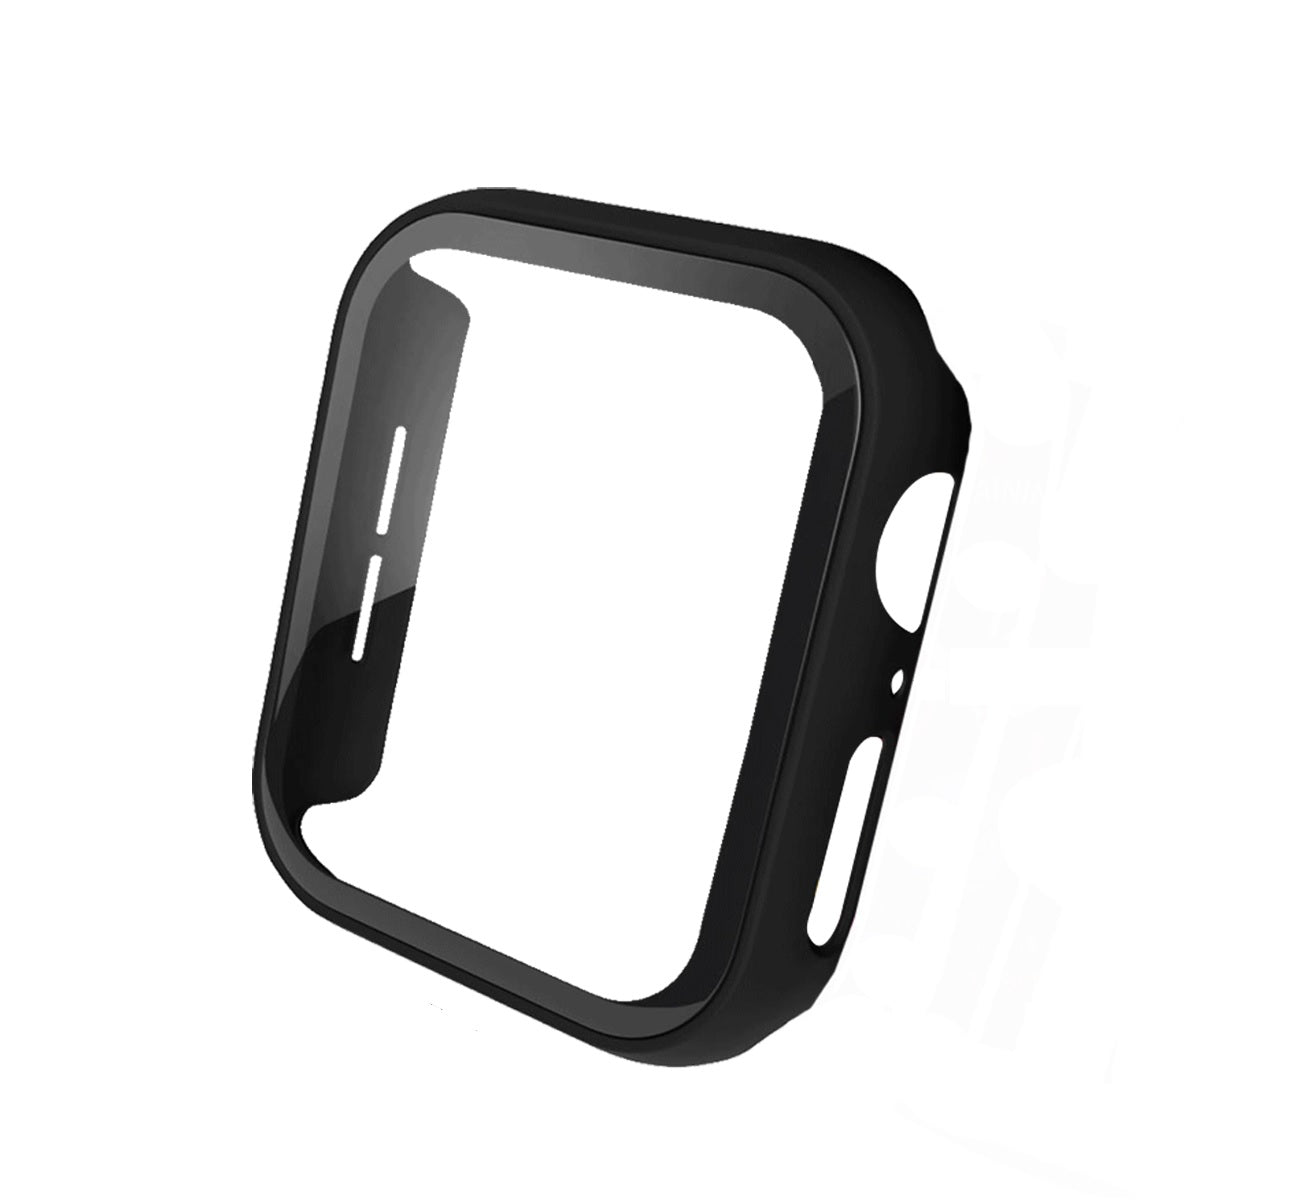 FLAUNT IWATCH PROTECTOR 38MM (Apple Watch Series-1,2,3)(Black)